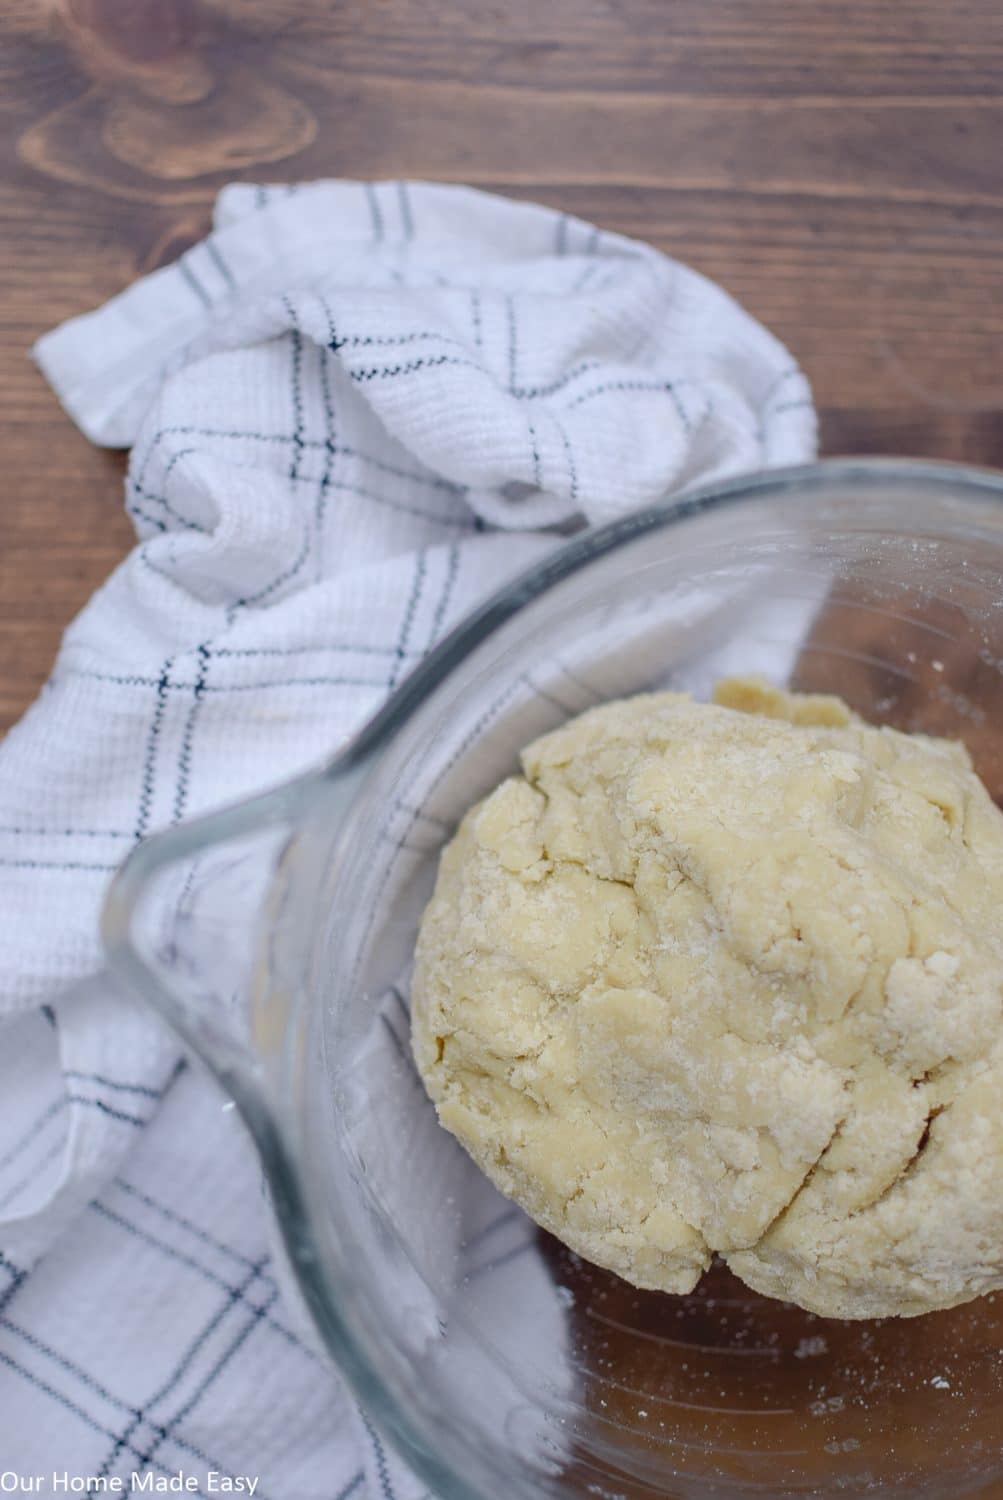 This sugar cookie dough is a super simple, sweet dough that makes perfect cookies!